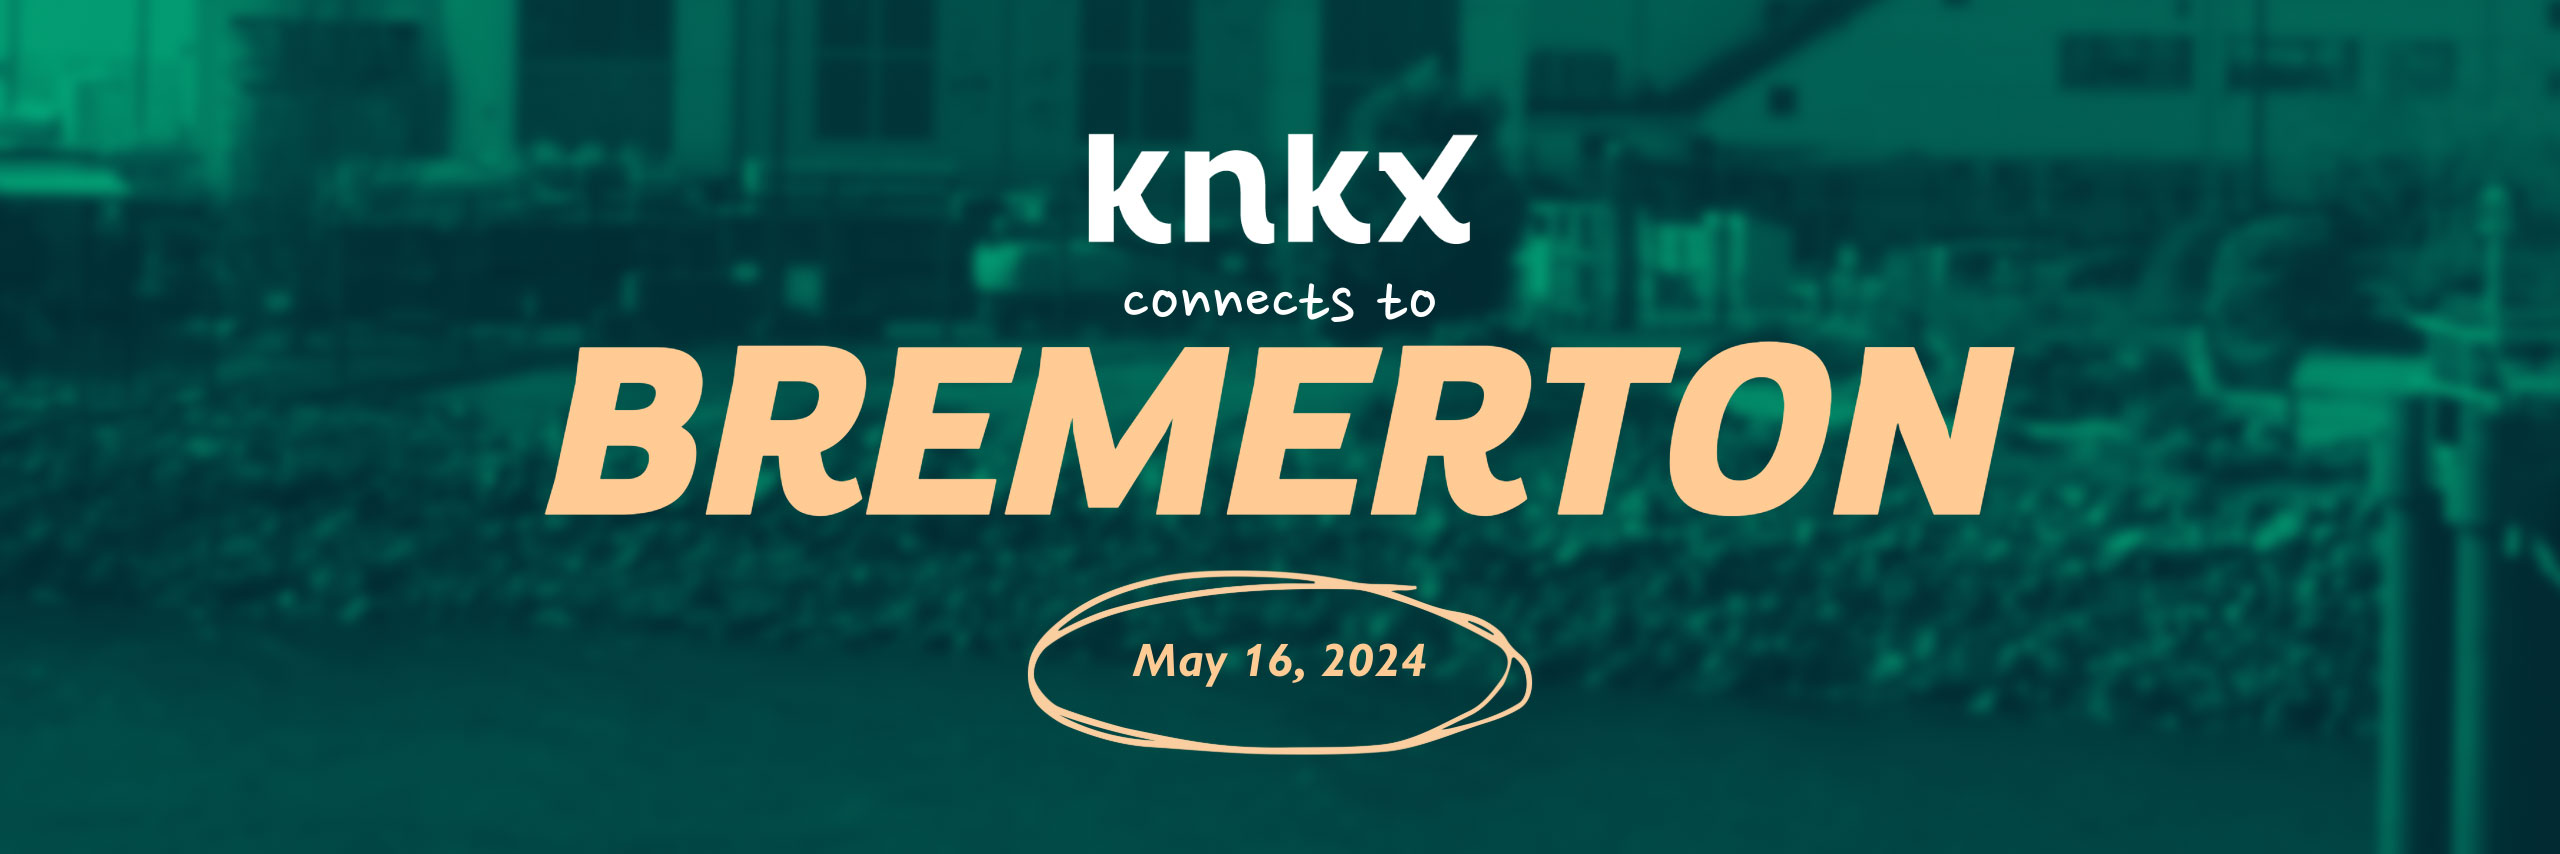 KNKX Connects to Bremerton